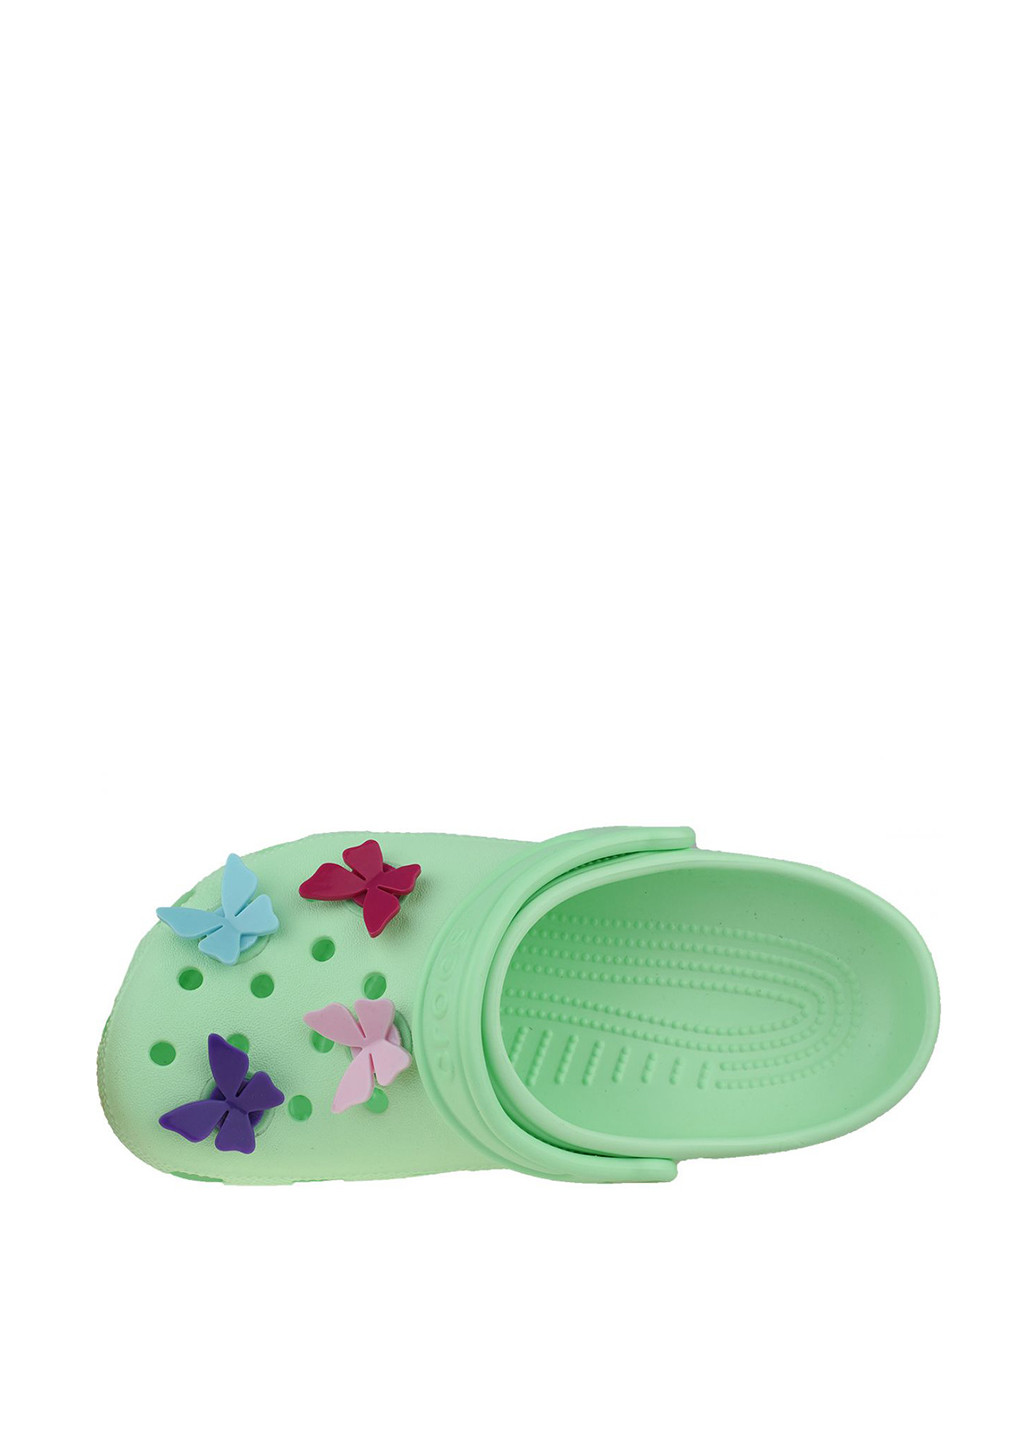 Сабо Crocs classic butterfly charm clg ps nmn (224418156)